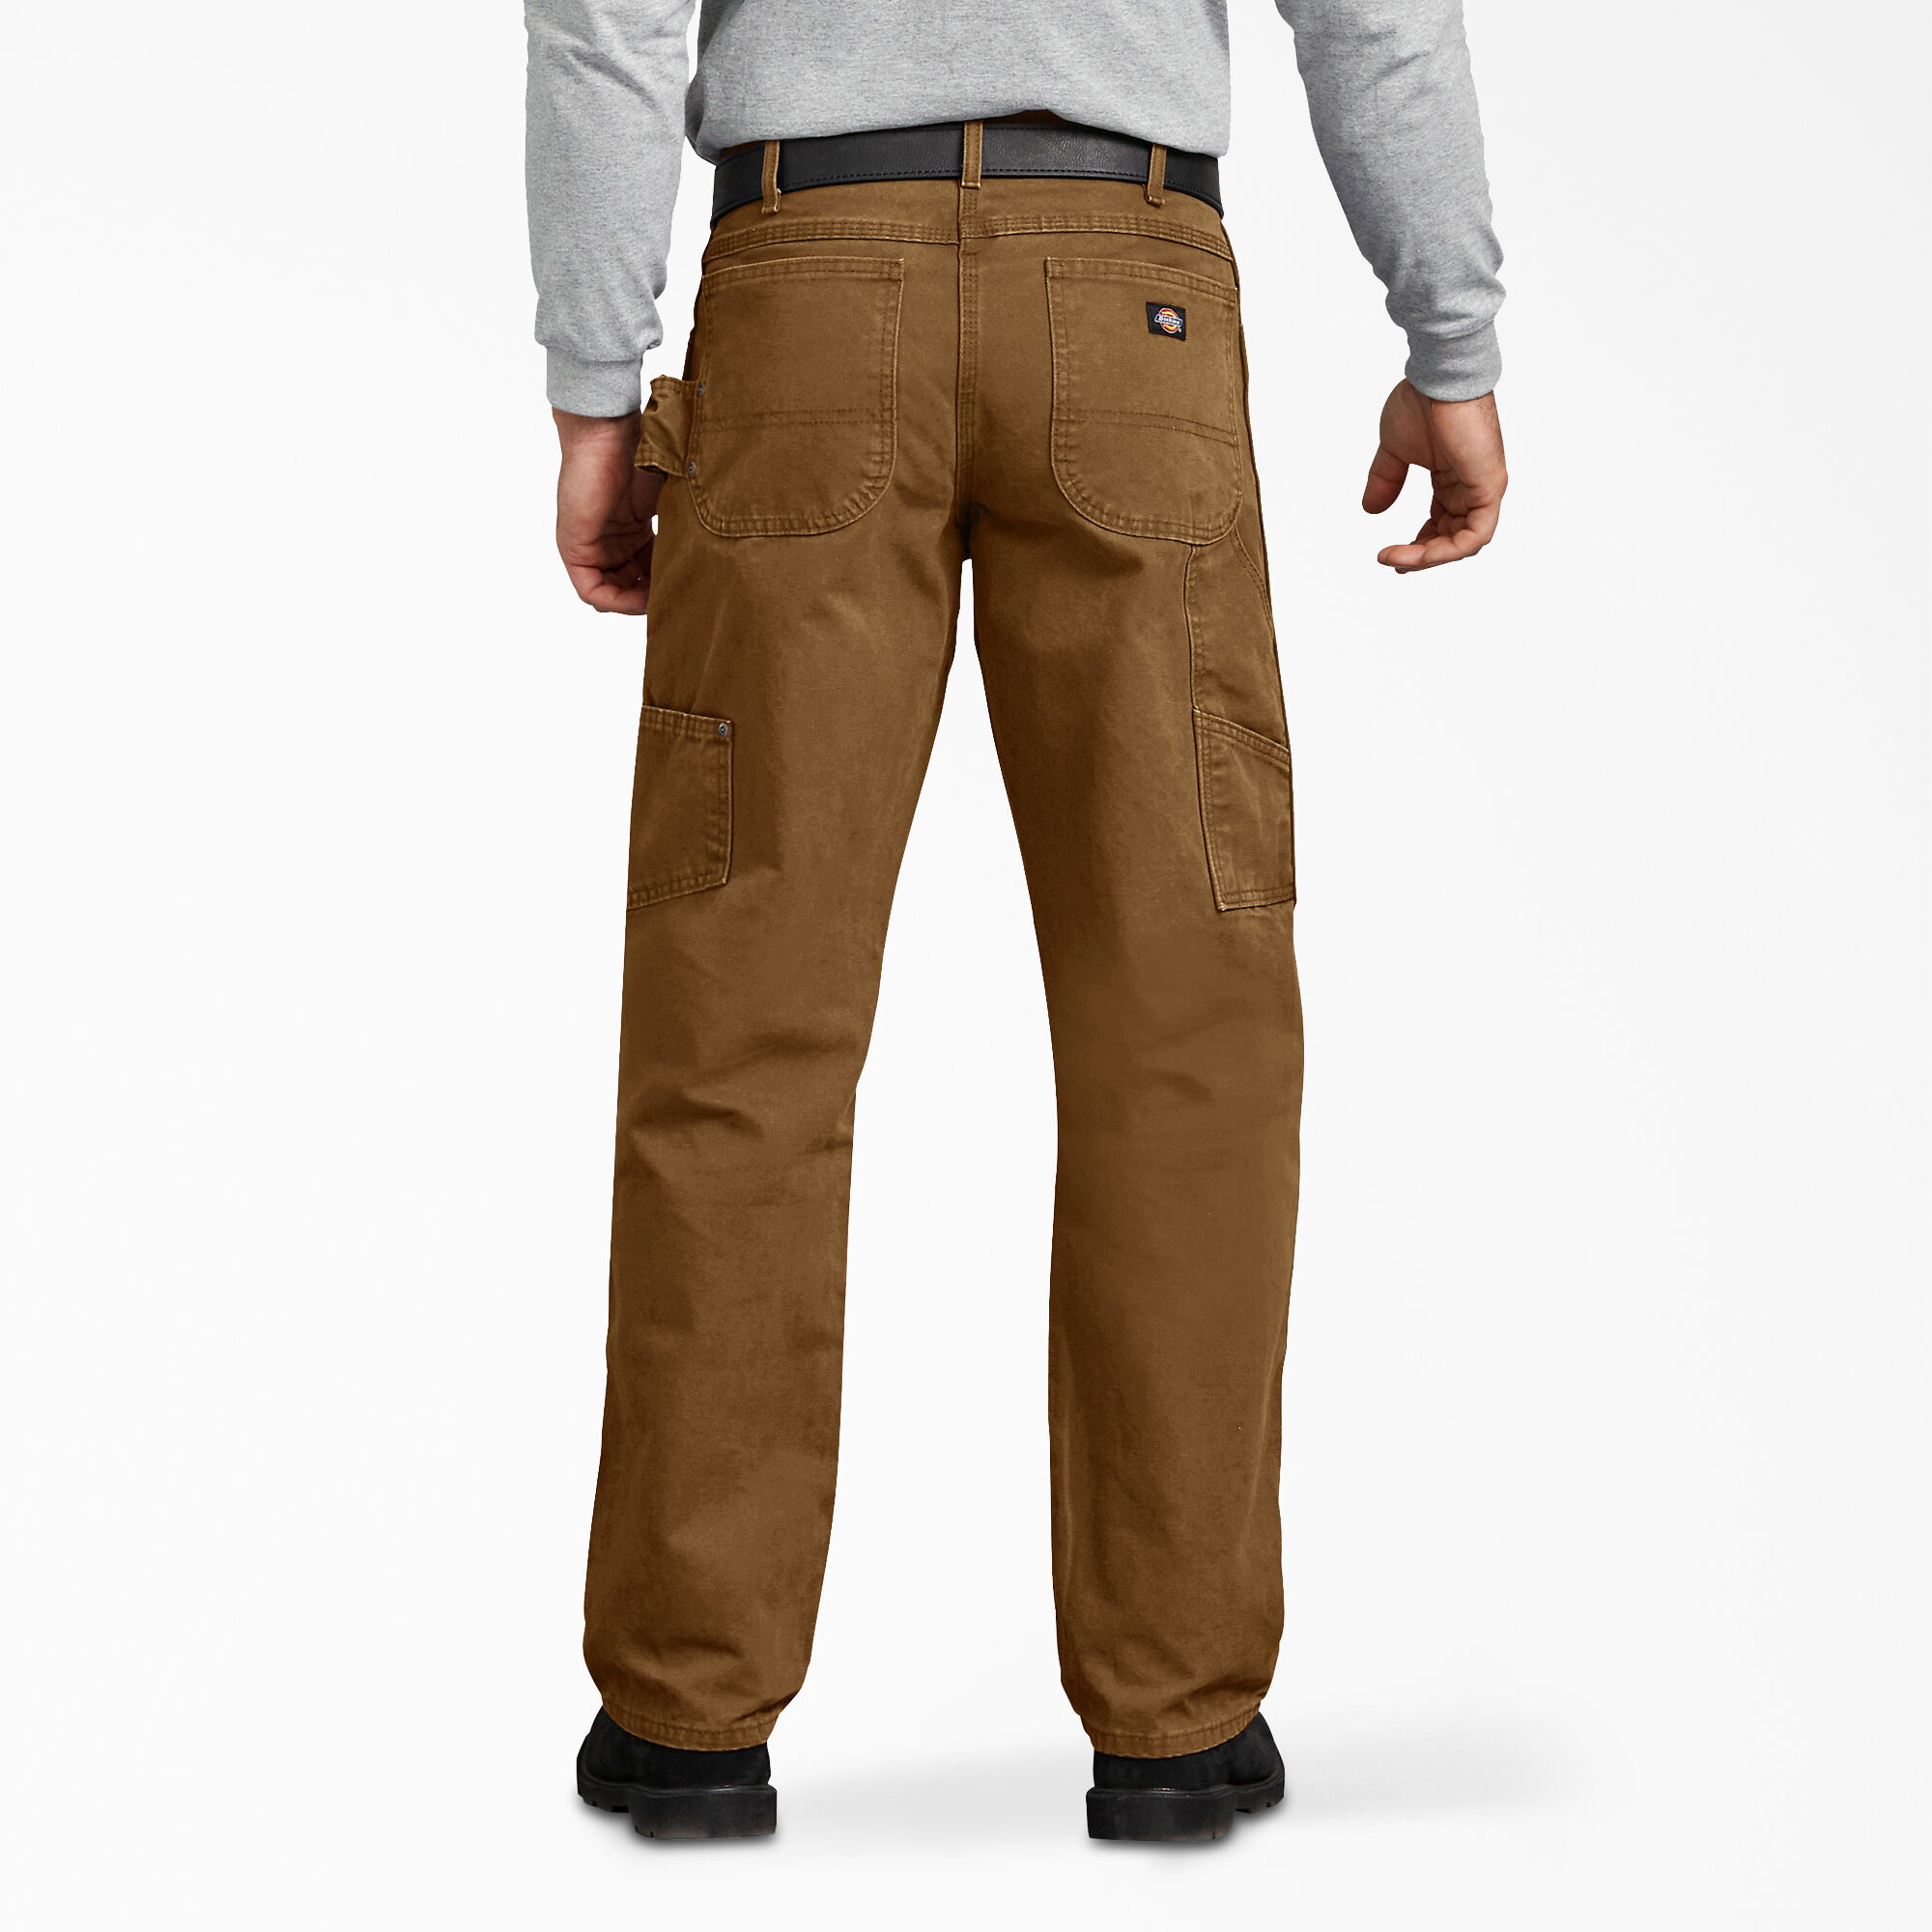 NEW DICKIES MENS RELAXED FIT BROWN CARPENTER JEAN PANTS MANY SIZES AVAILABLE 